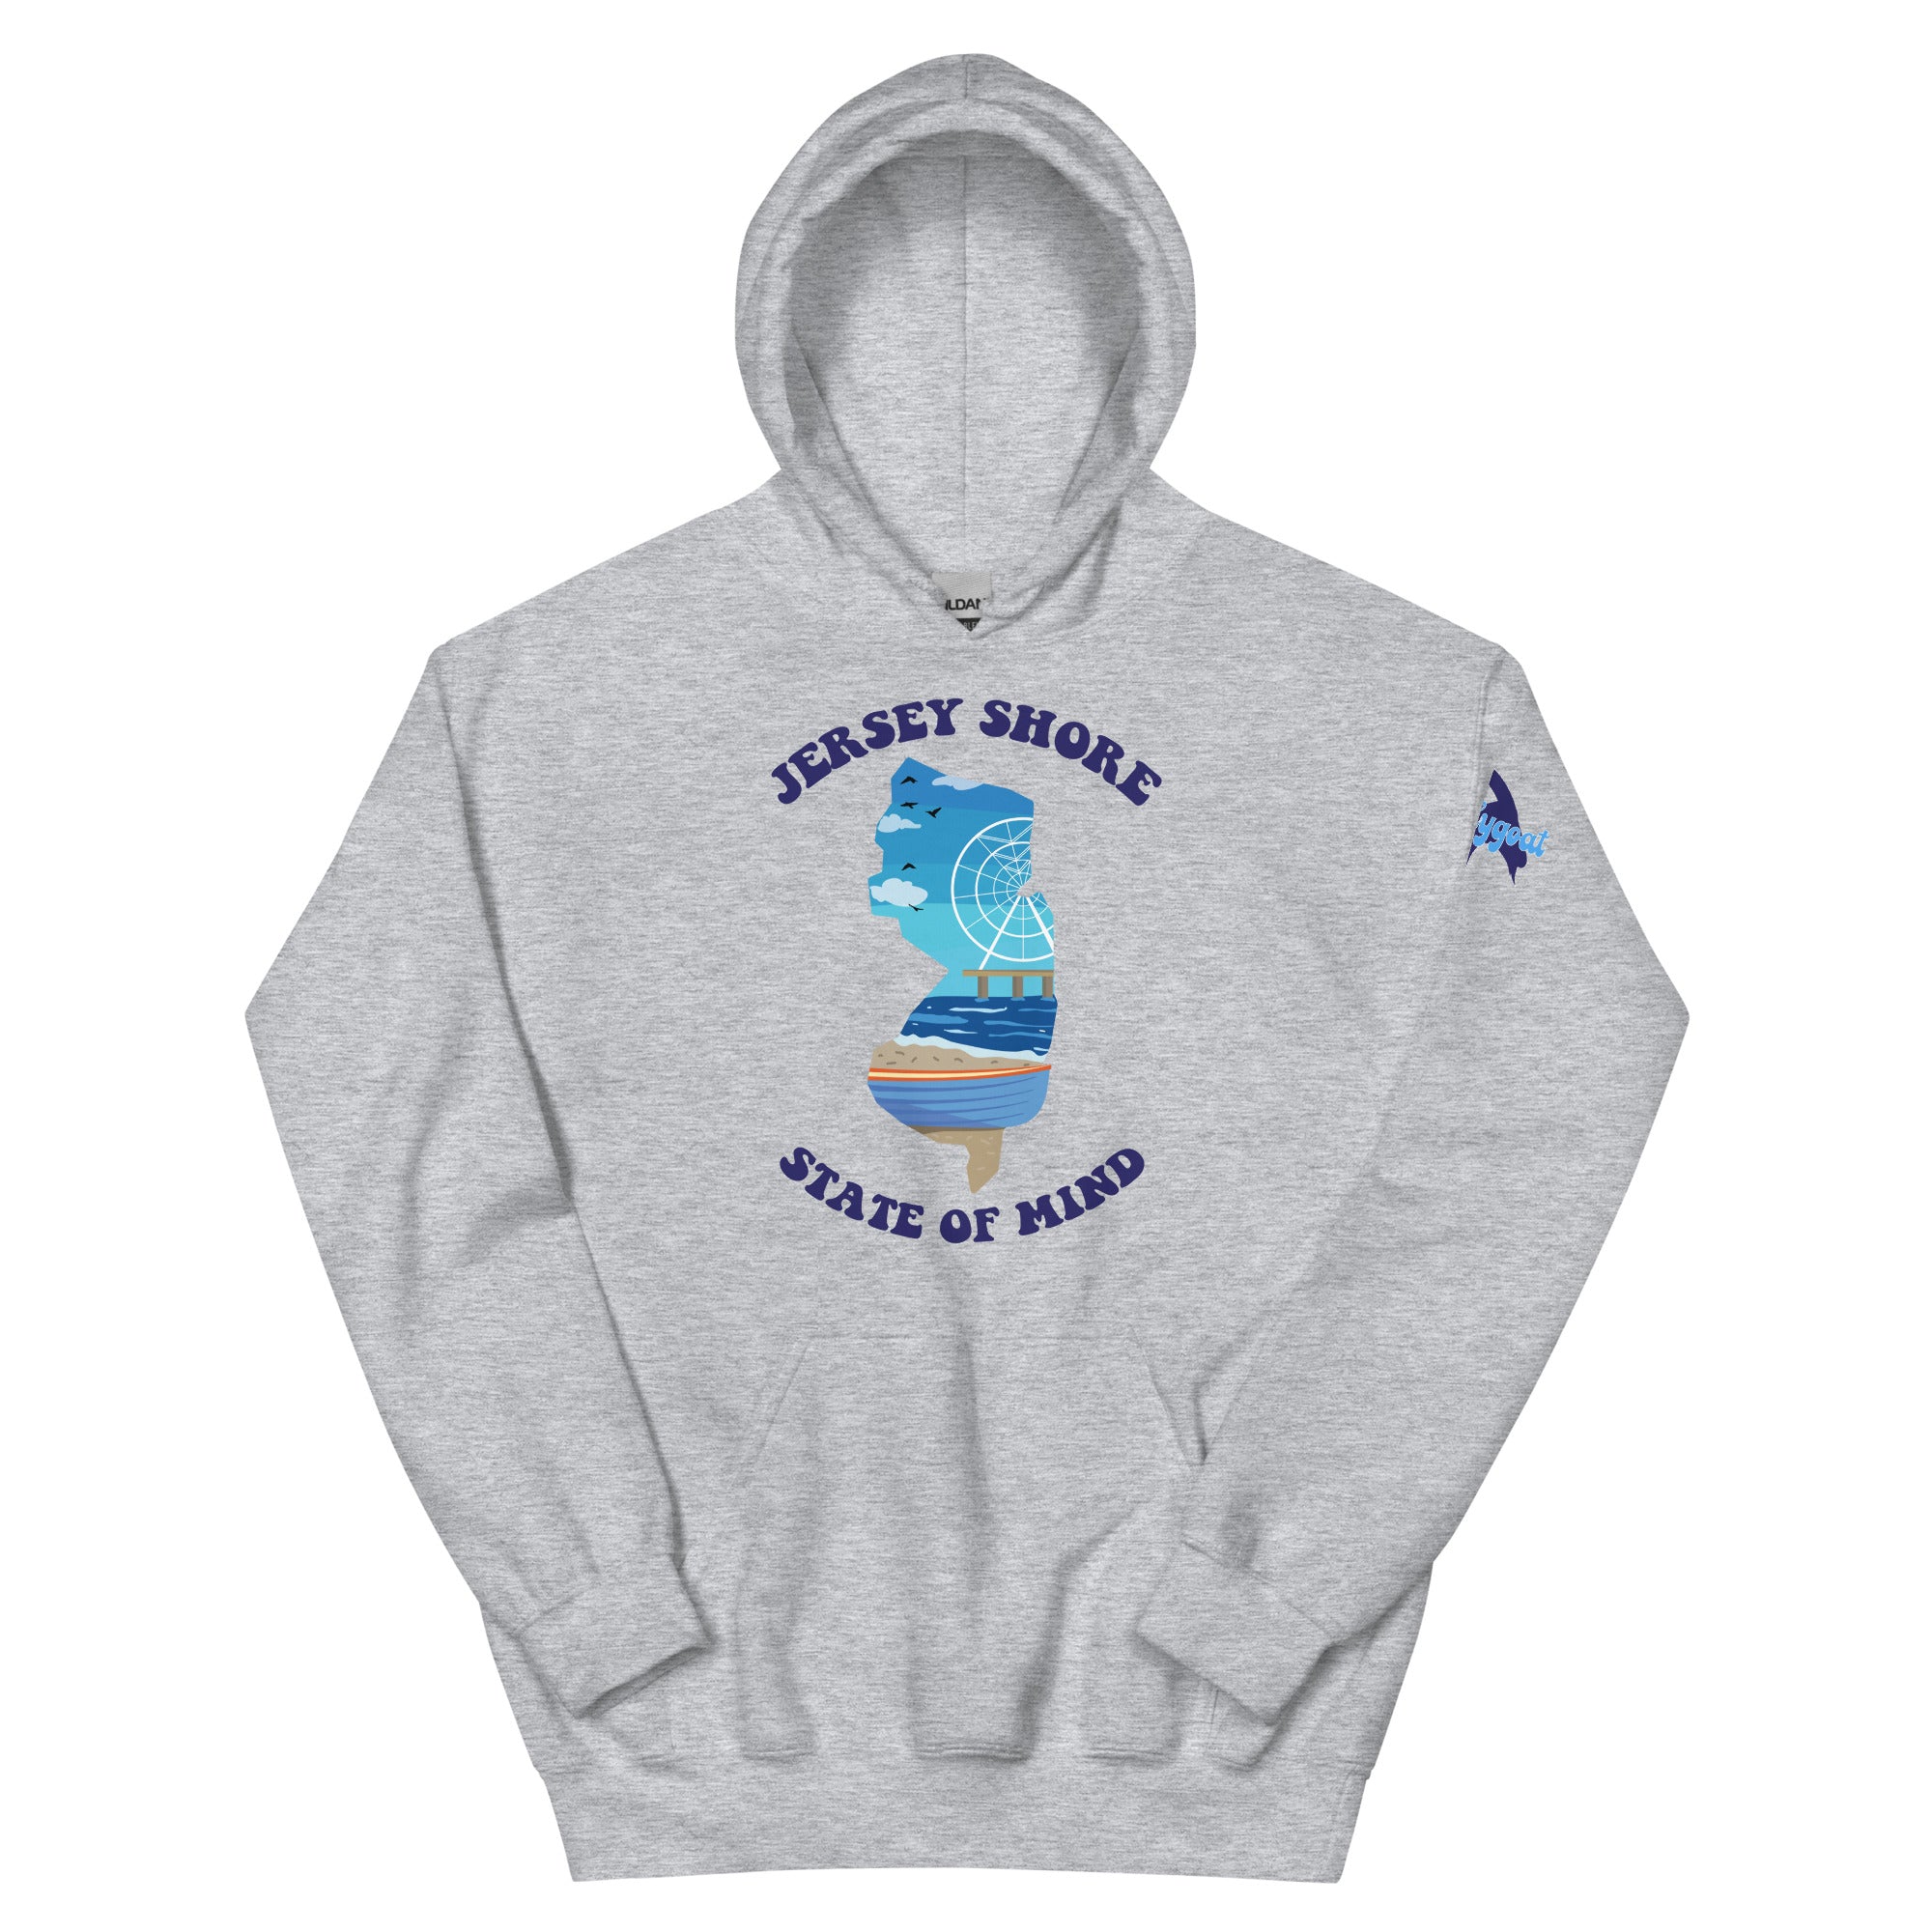 "Jersey Shore State of Mind" Hoodie